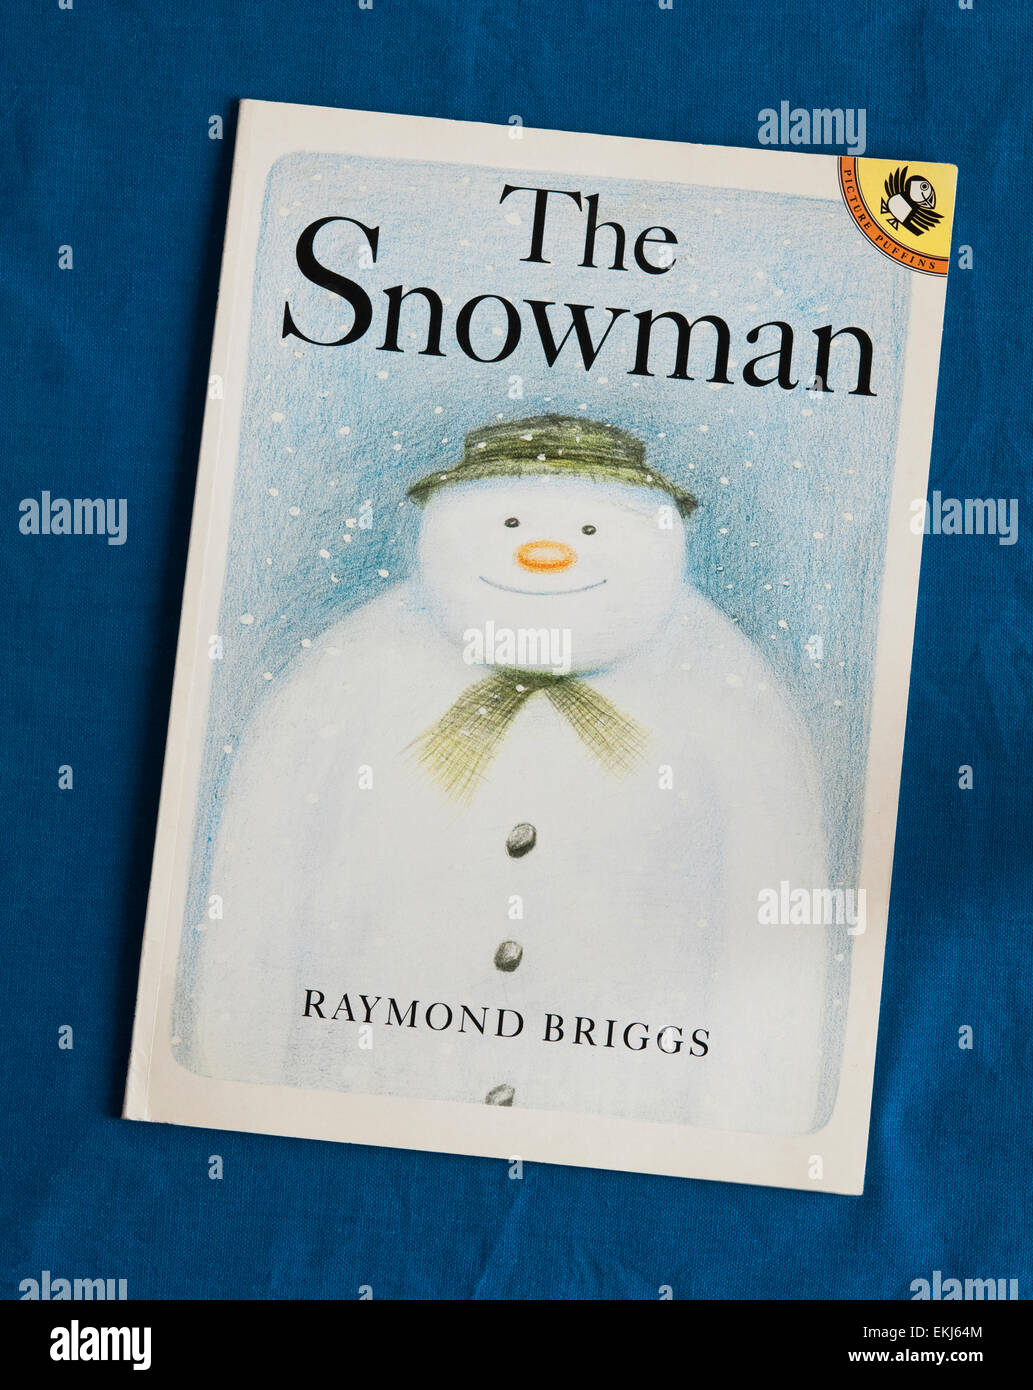 The Snowman - a wordless picture story book - created and illustrated by Raymond Briggs, published by Puffin Books in 1980. UK. Stock Photo